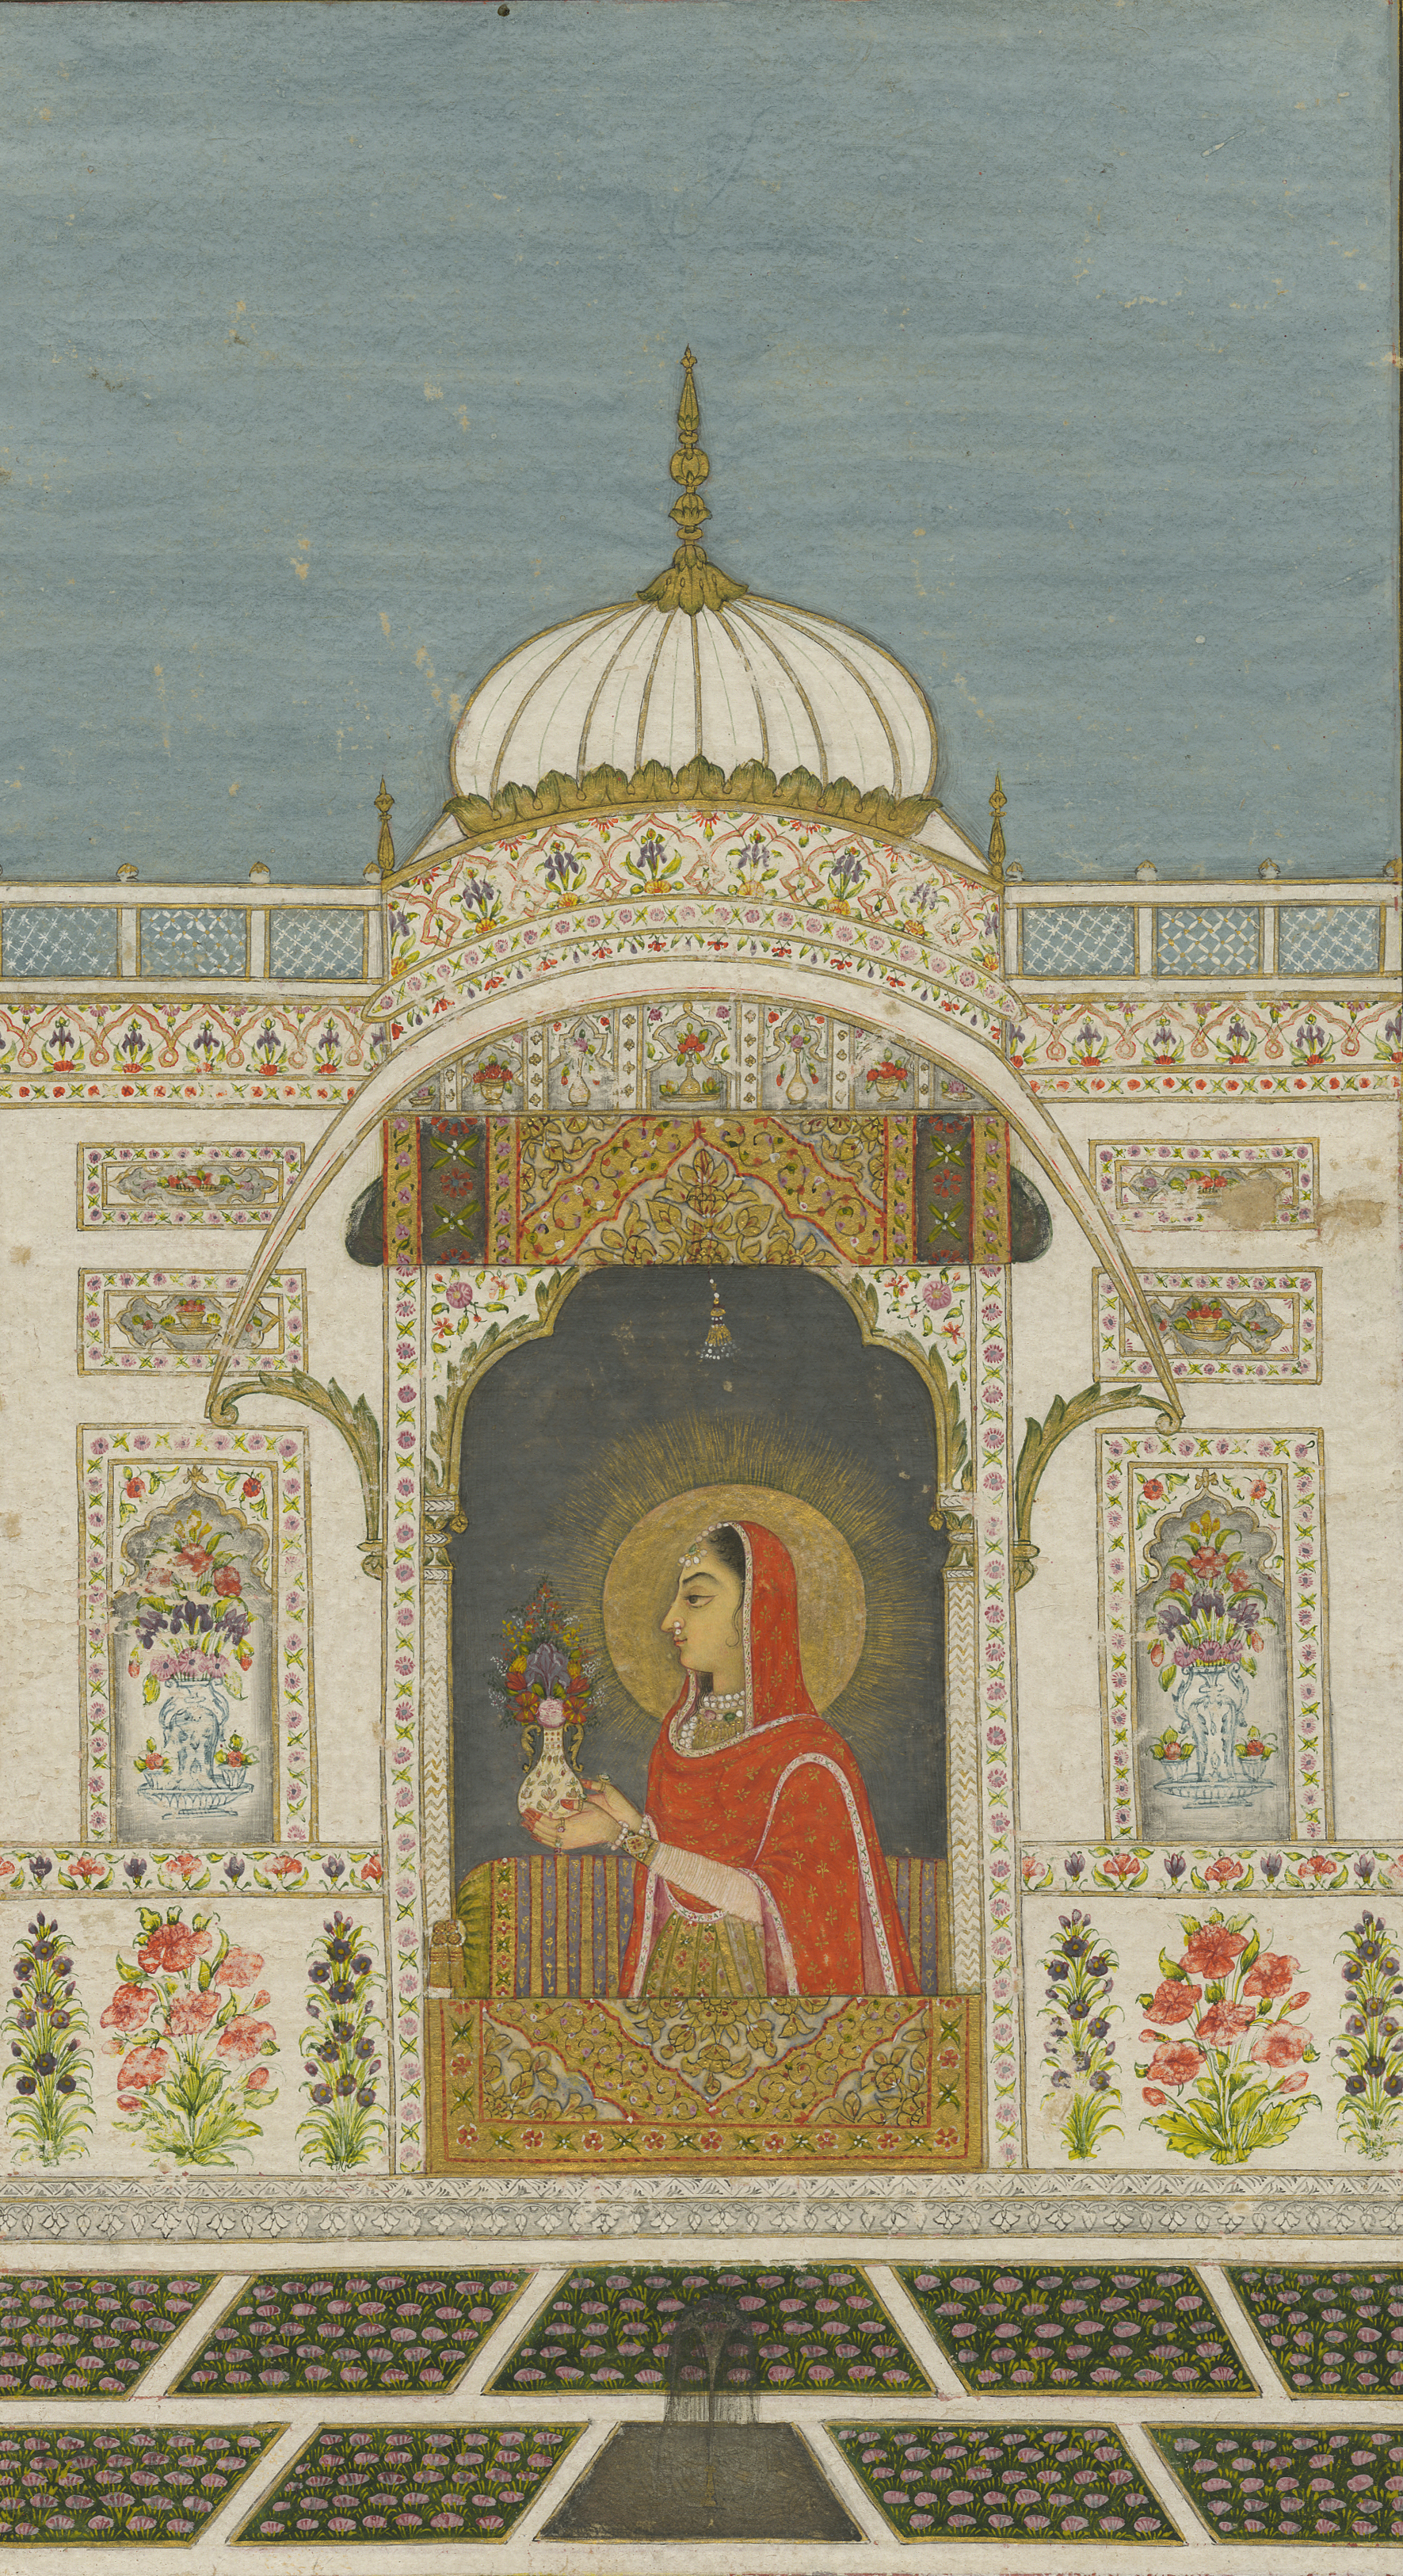 Detailed painting in blue, whites and yellow of a woman with dark hair in robe sitting at a window in a place with blue sky in background with ornate design framing the image